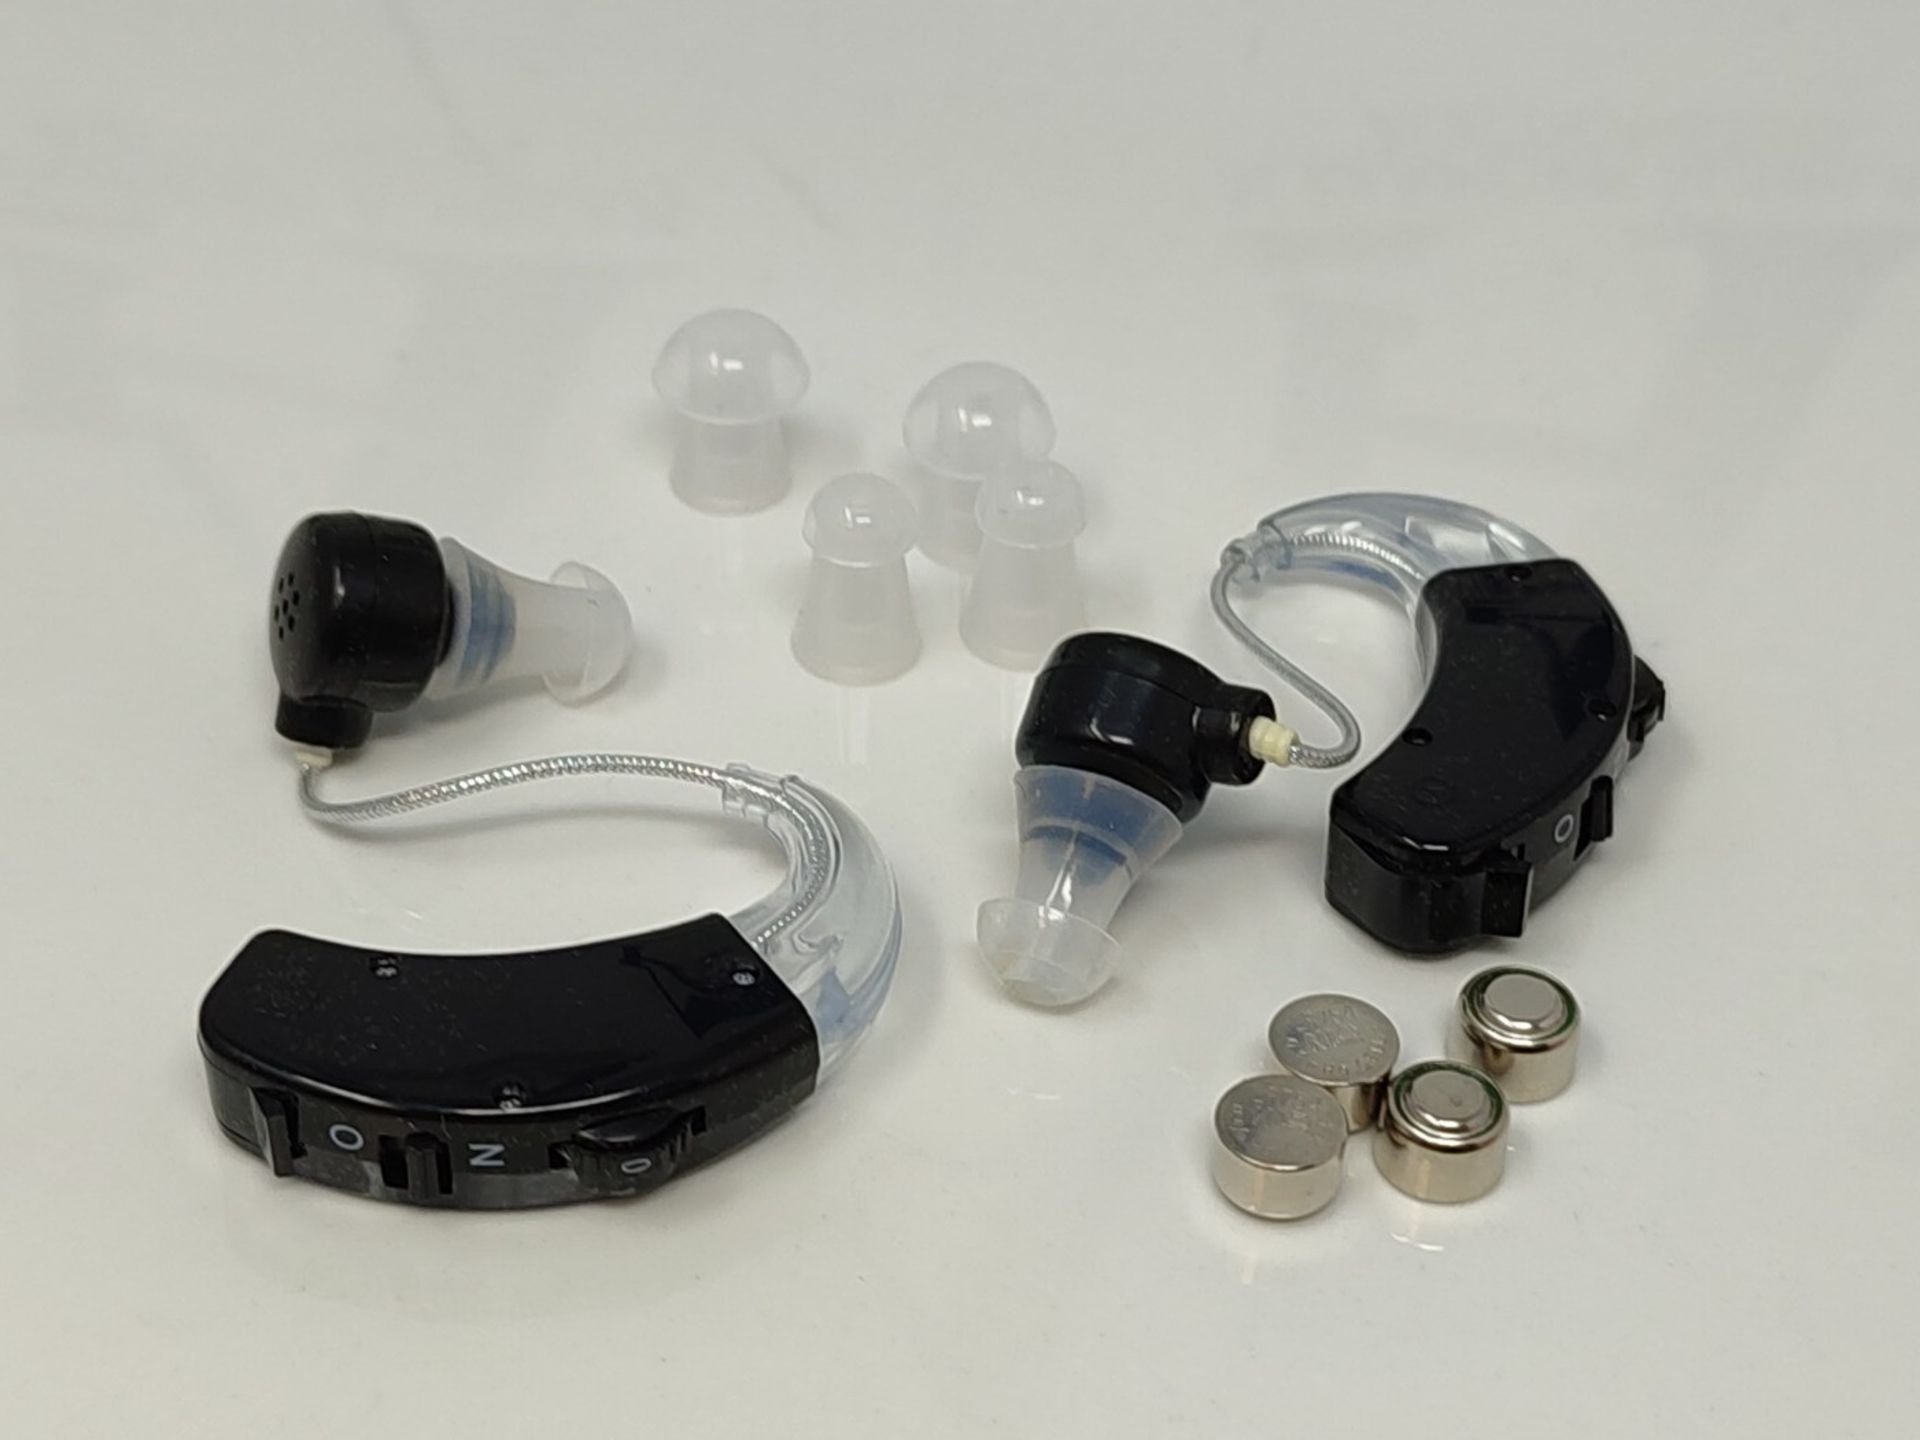 Behind the Ear Sound Amplifier - BTE Hearing Ear Amplification Device and Digital Soun - Image 2 of 2